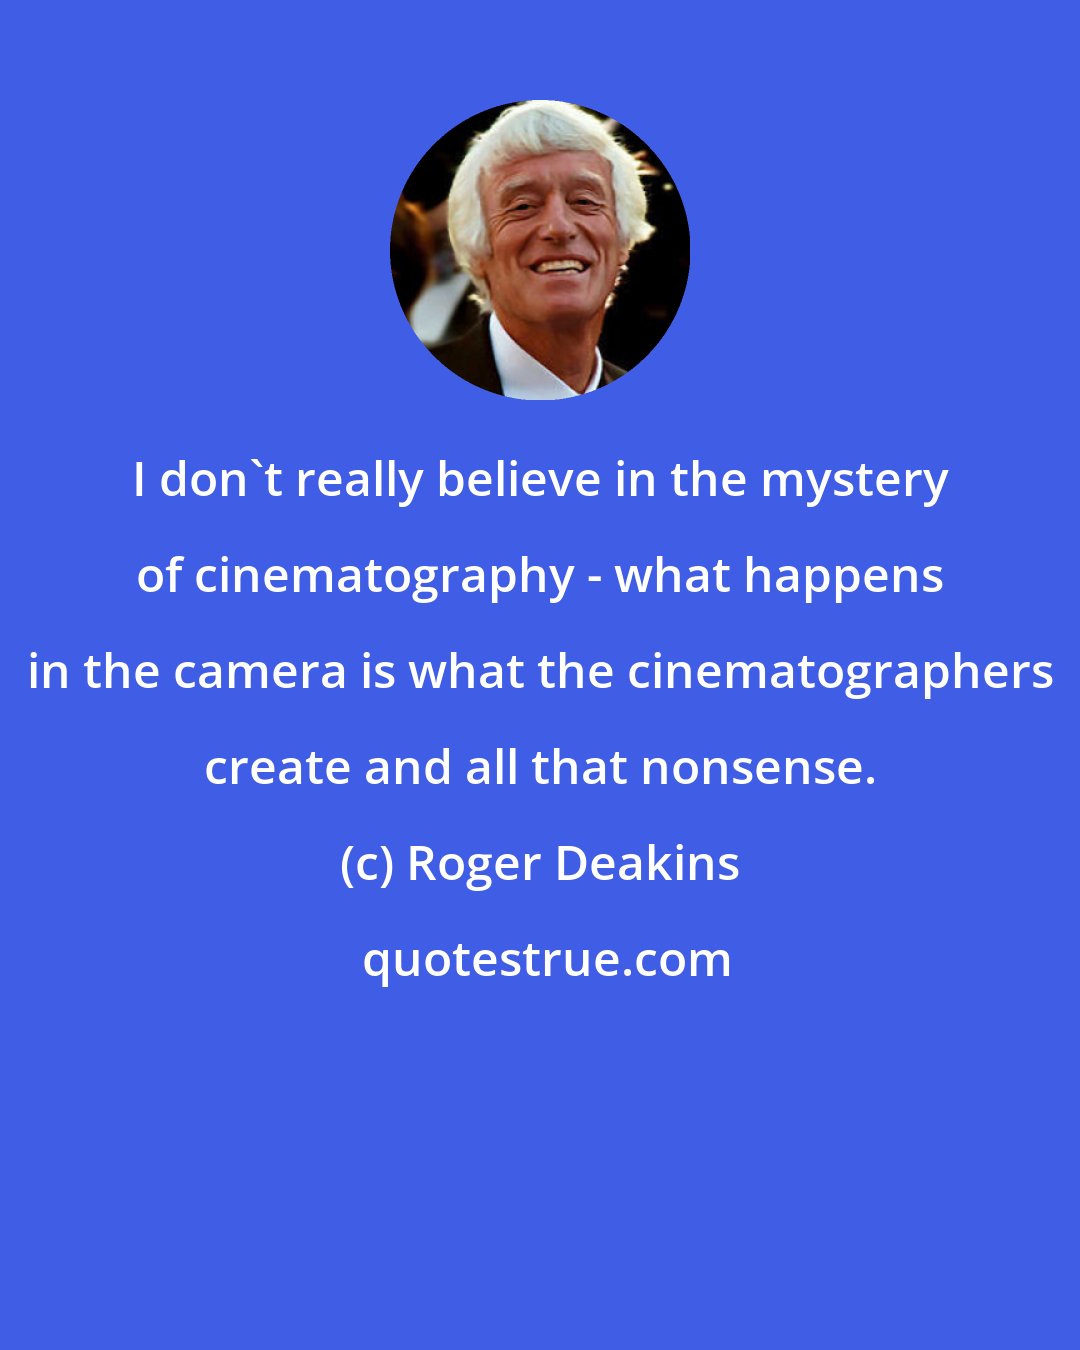 Roger Deakins: I don't really believe in the mystery of cinematography - what happens in the camera is what the cinematographers create and all that nonsense.